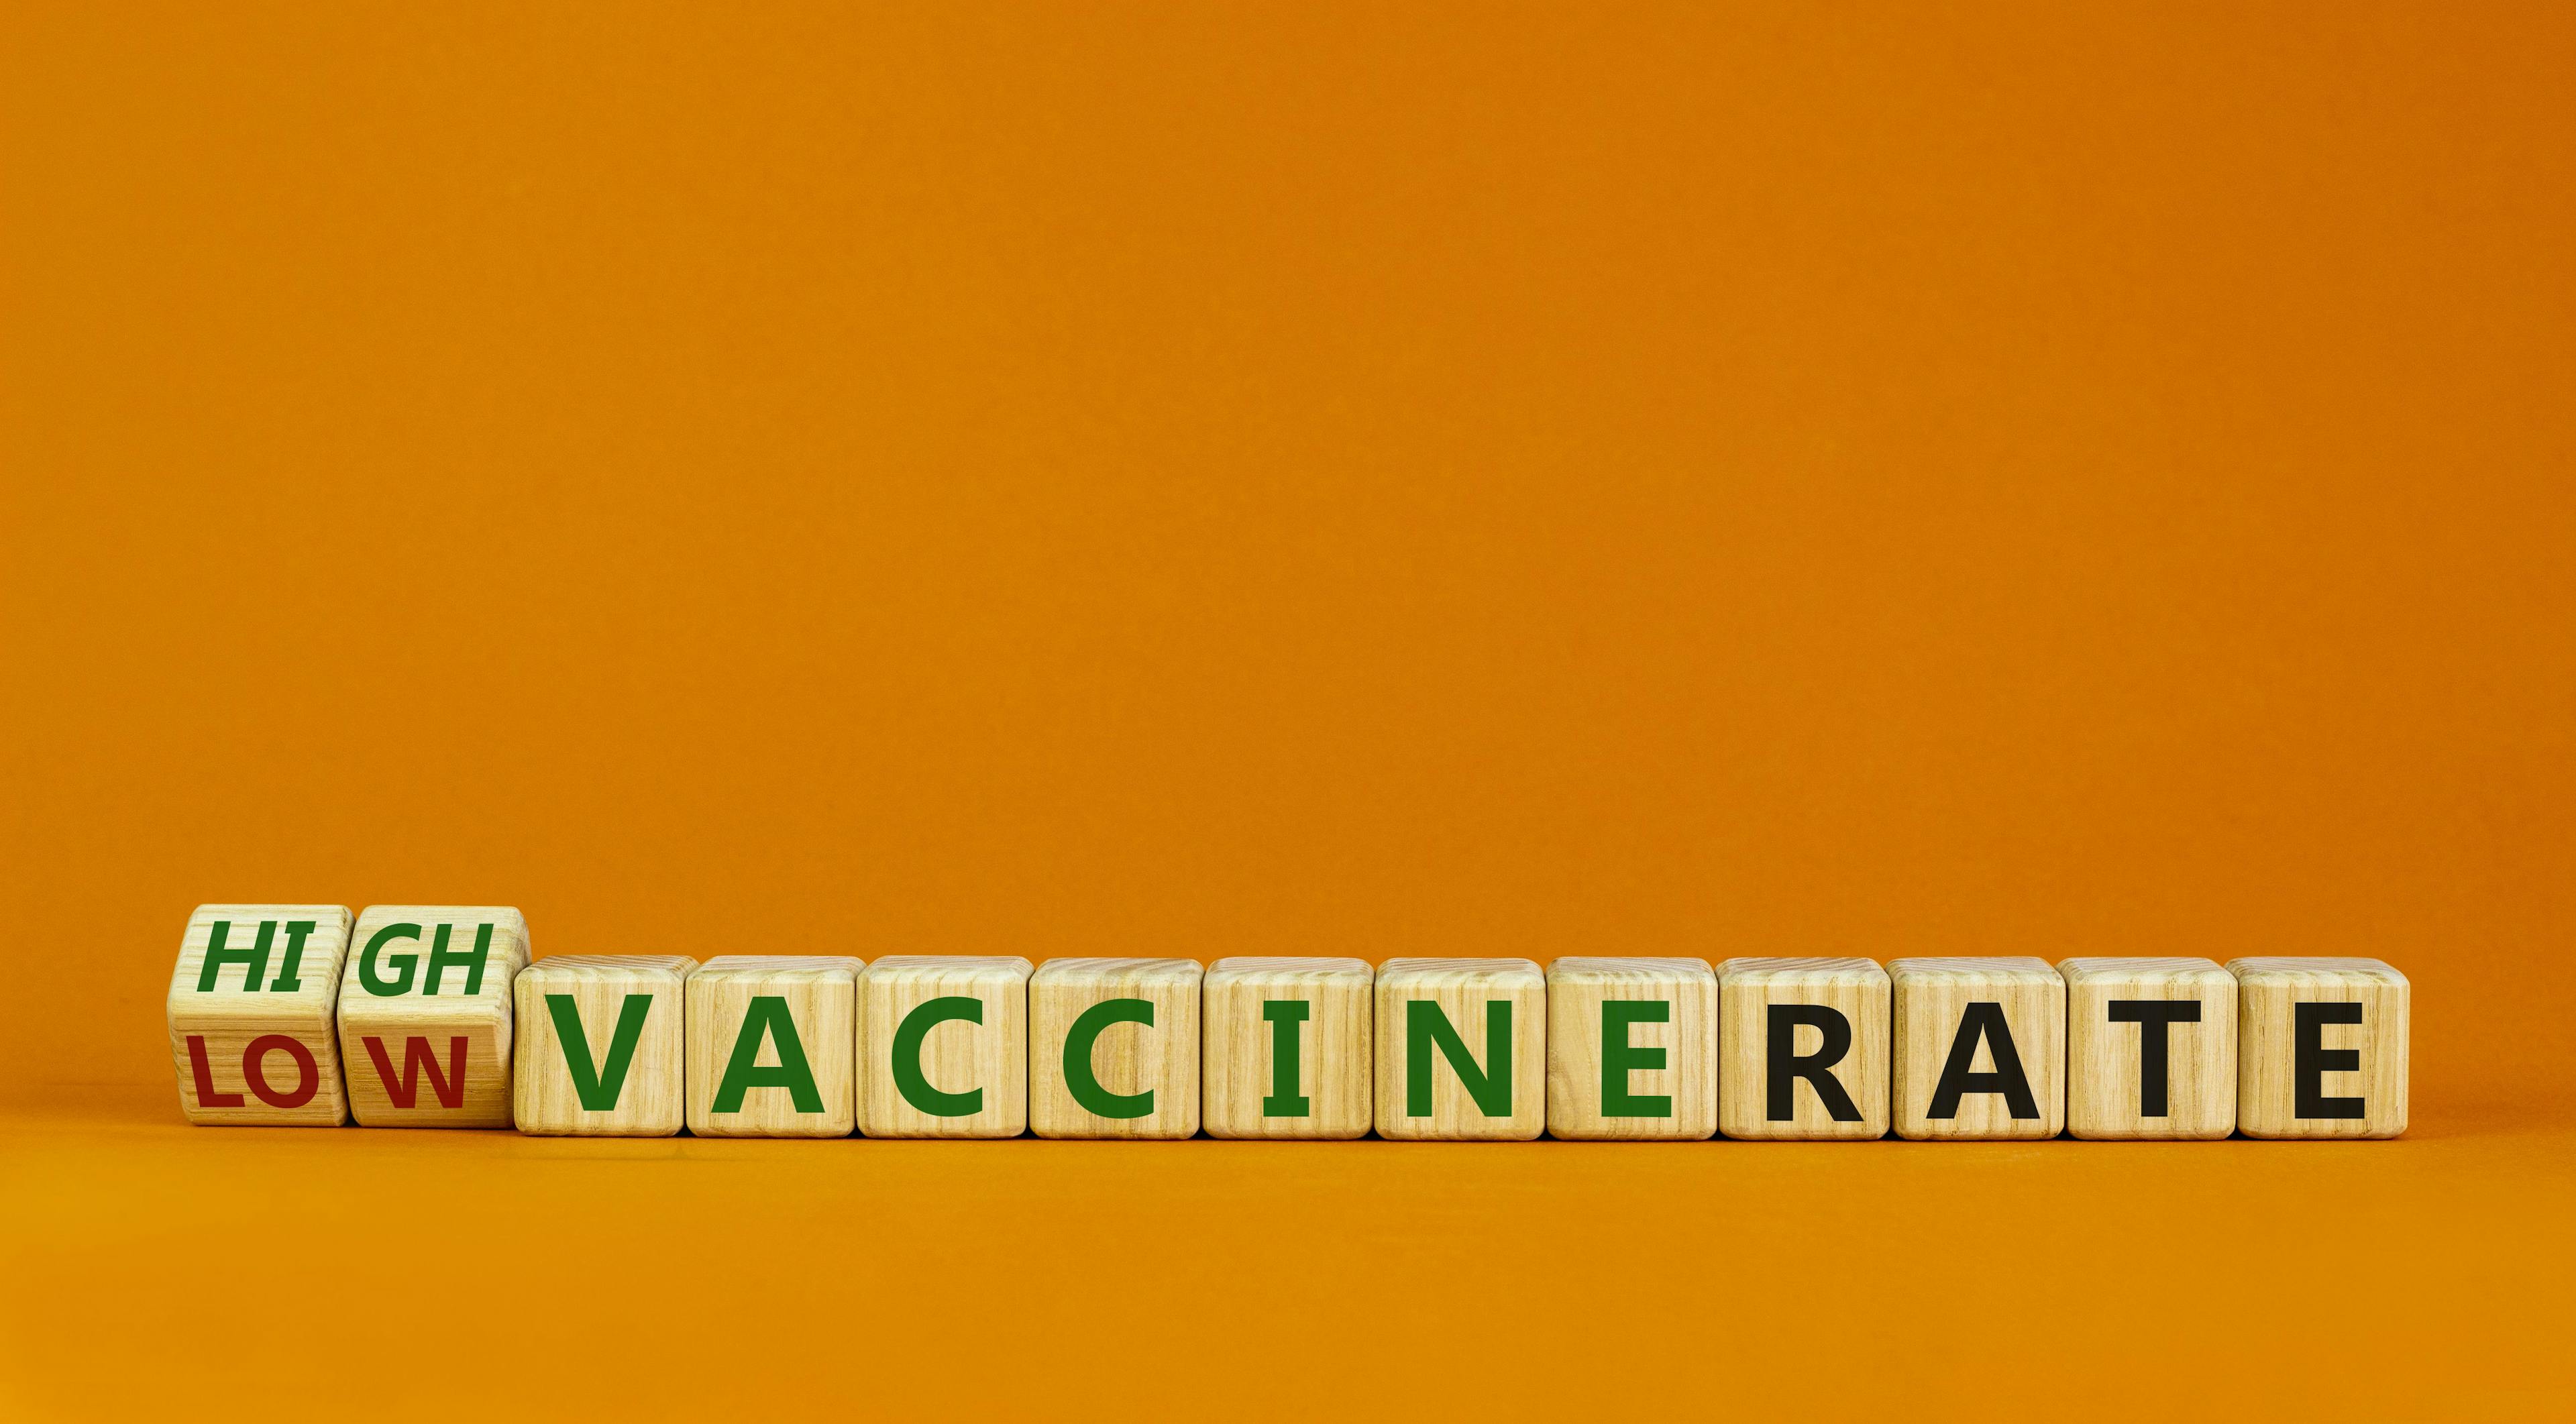 Lottery-Based Incentives Do Not Increase COVID-19 Vaccination Rates